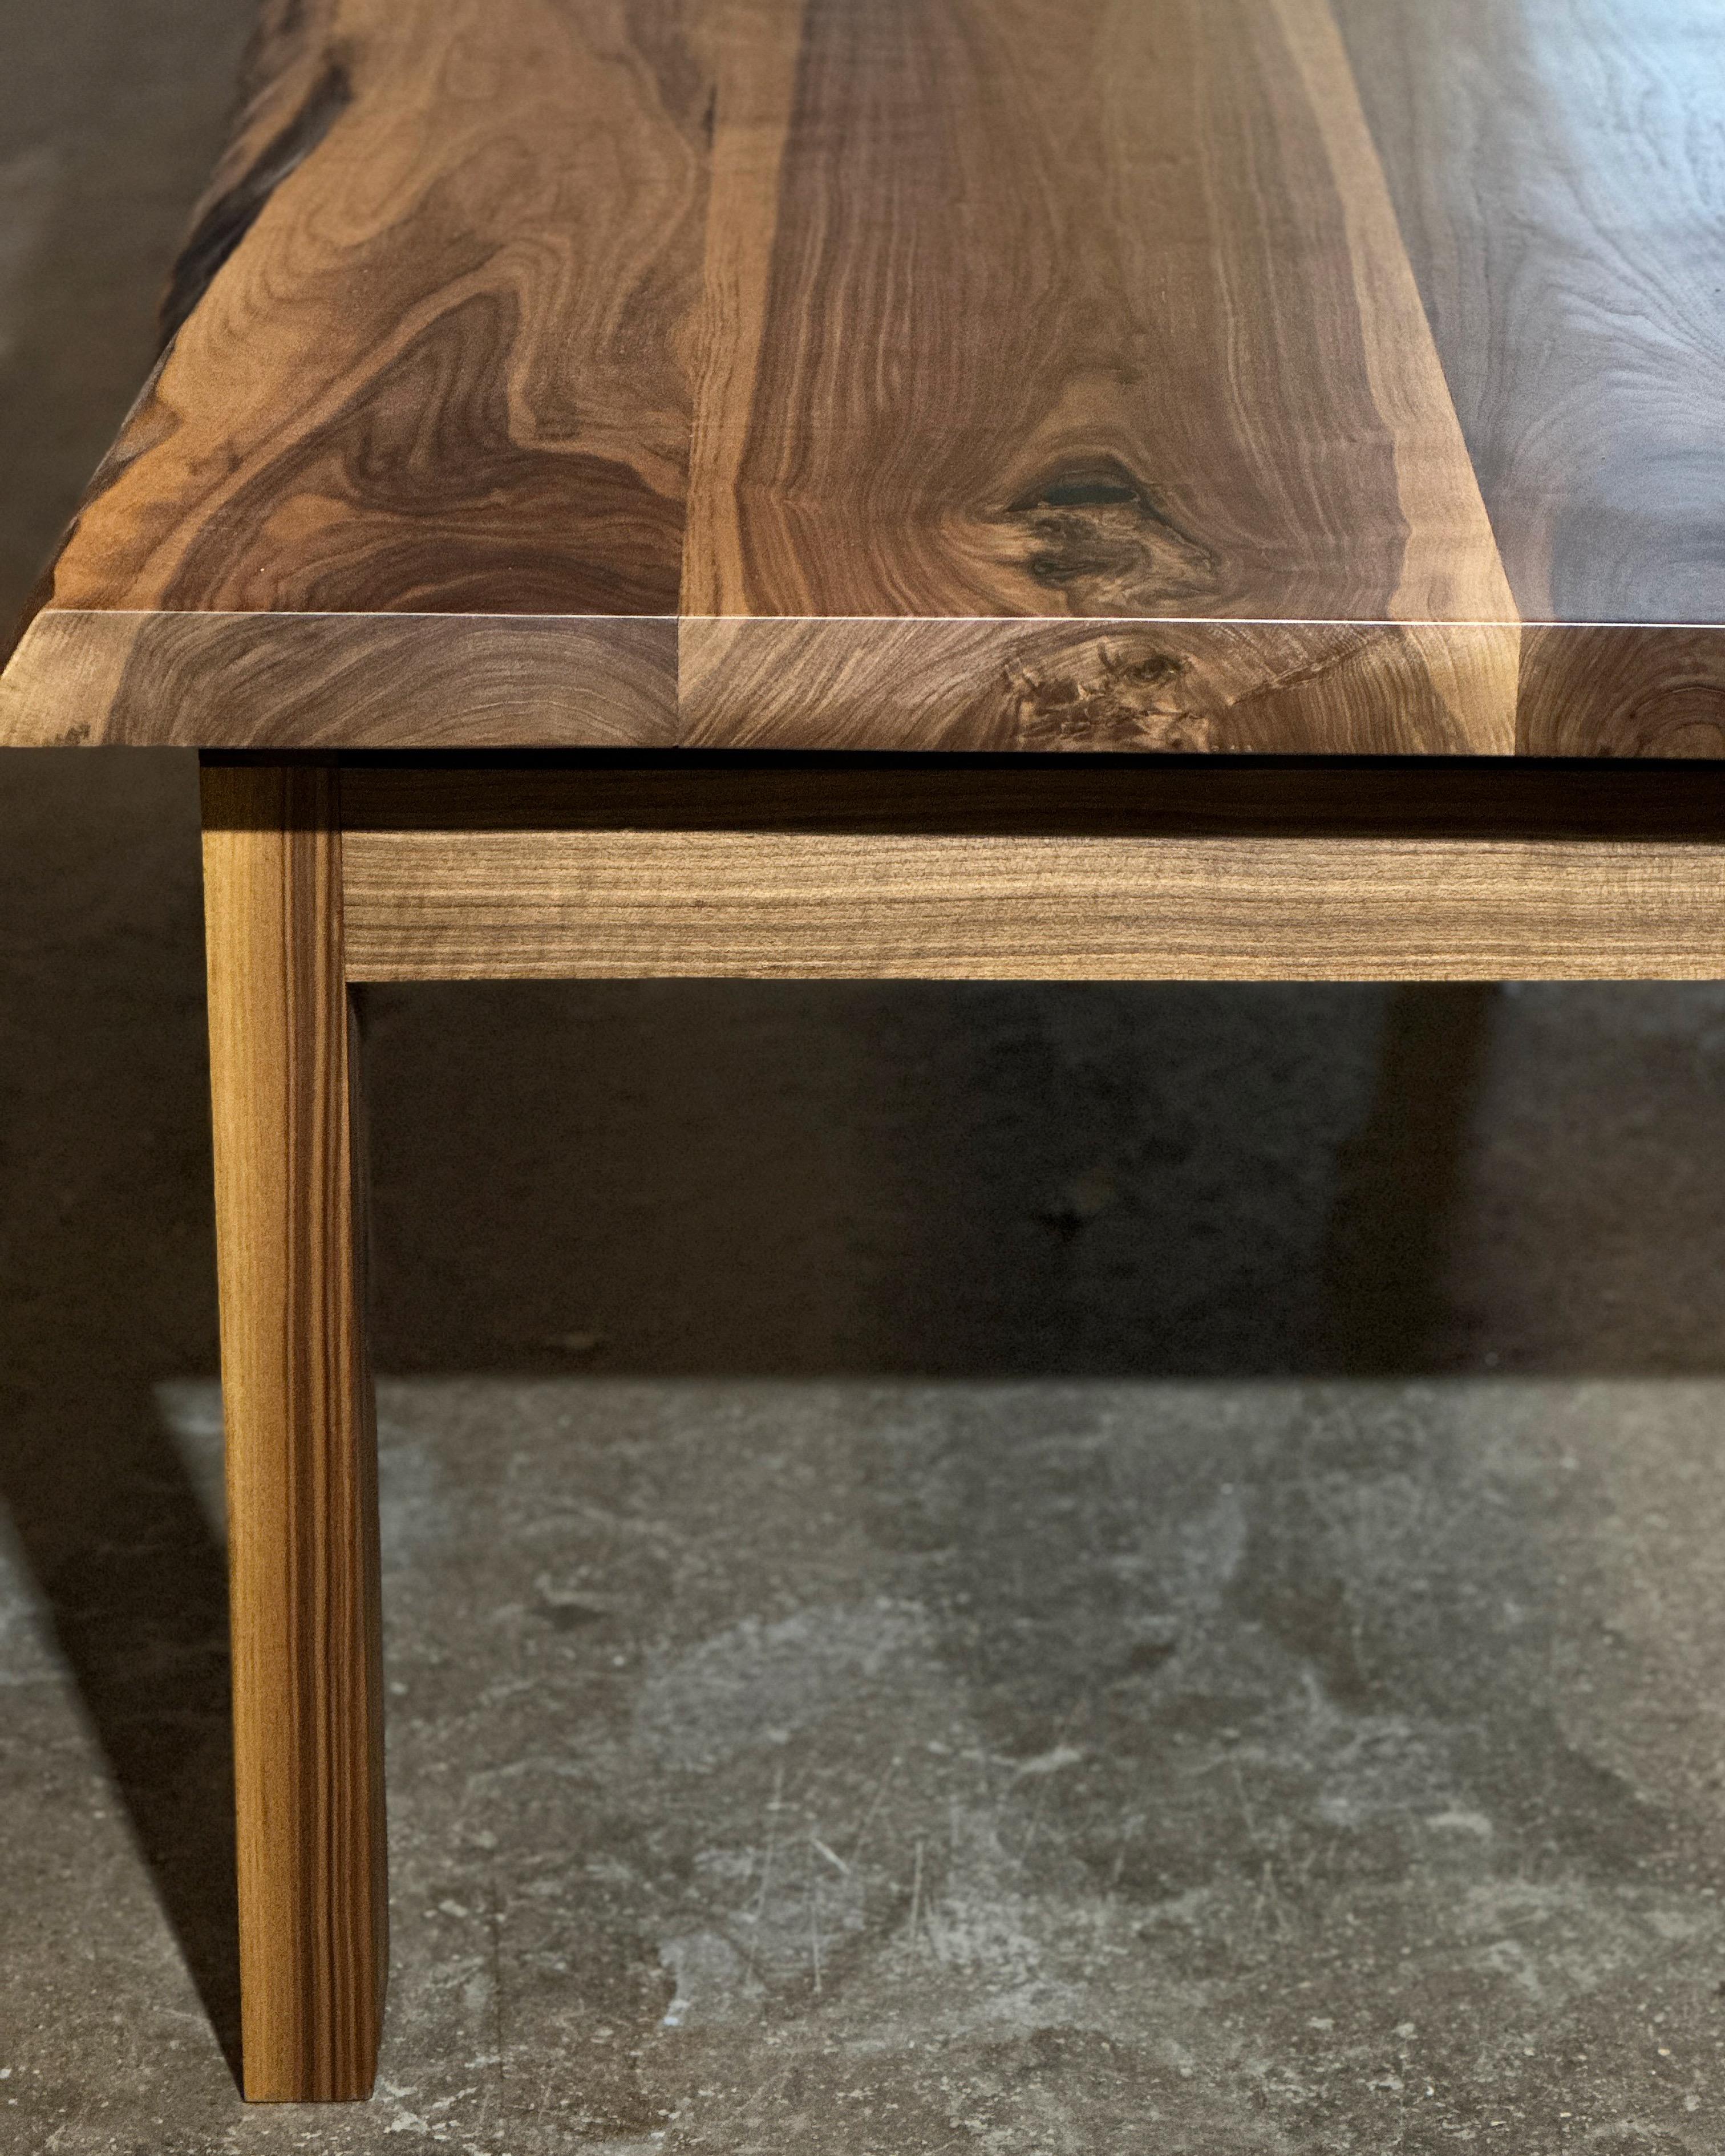 American Walnut live edge / waney edge dining table with matching American Walnut base. 
Professional, hardwearing spray finish, hardware integrated to allow ease of assembly and disassembly. 

Price is for 2400mm L x 1000mm W. 
All sizes, finishes